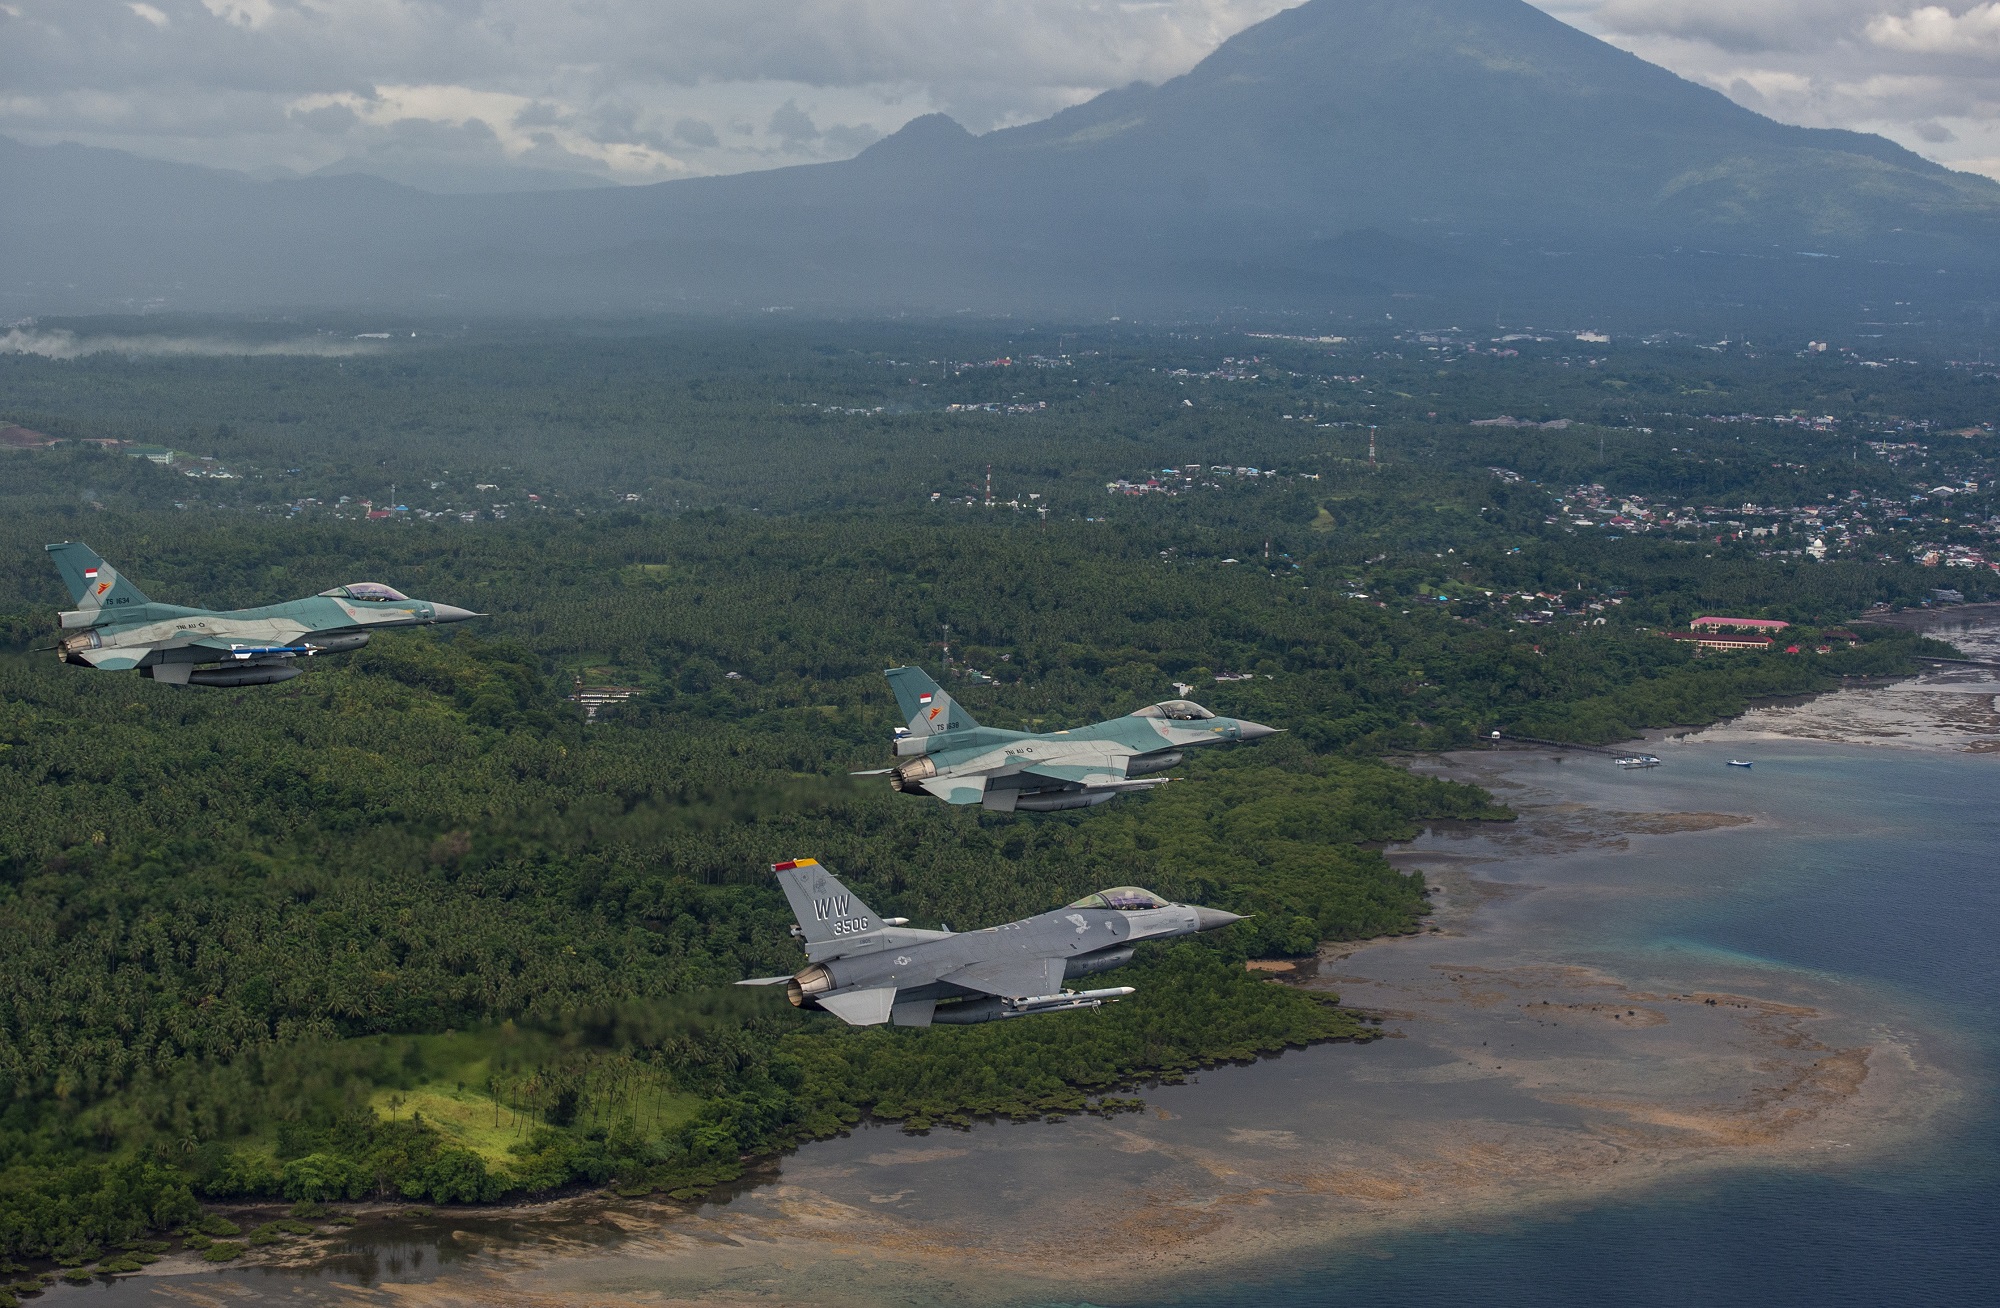 US Air Forces F-16s to Participate in Exercise Cope West 2021 in Indonesia